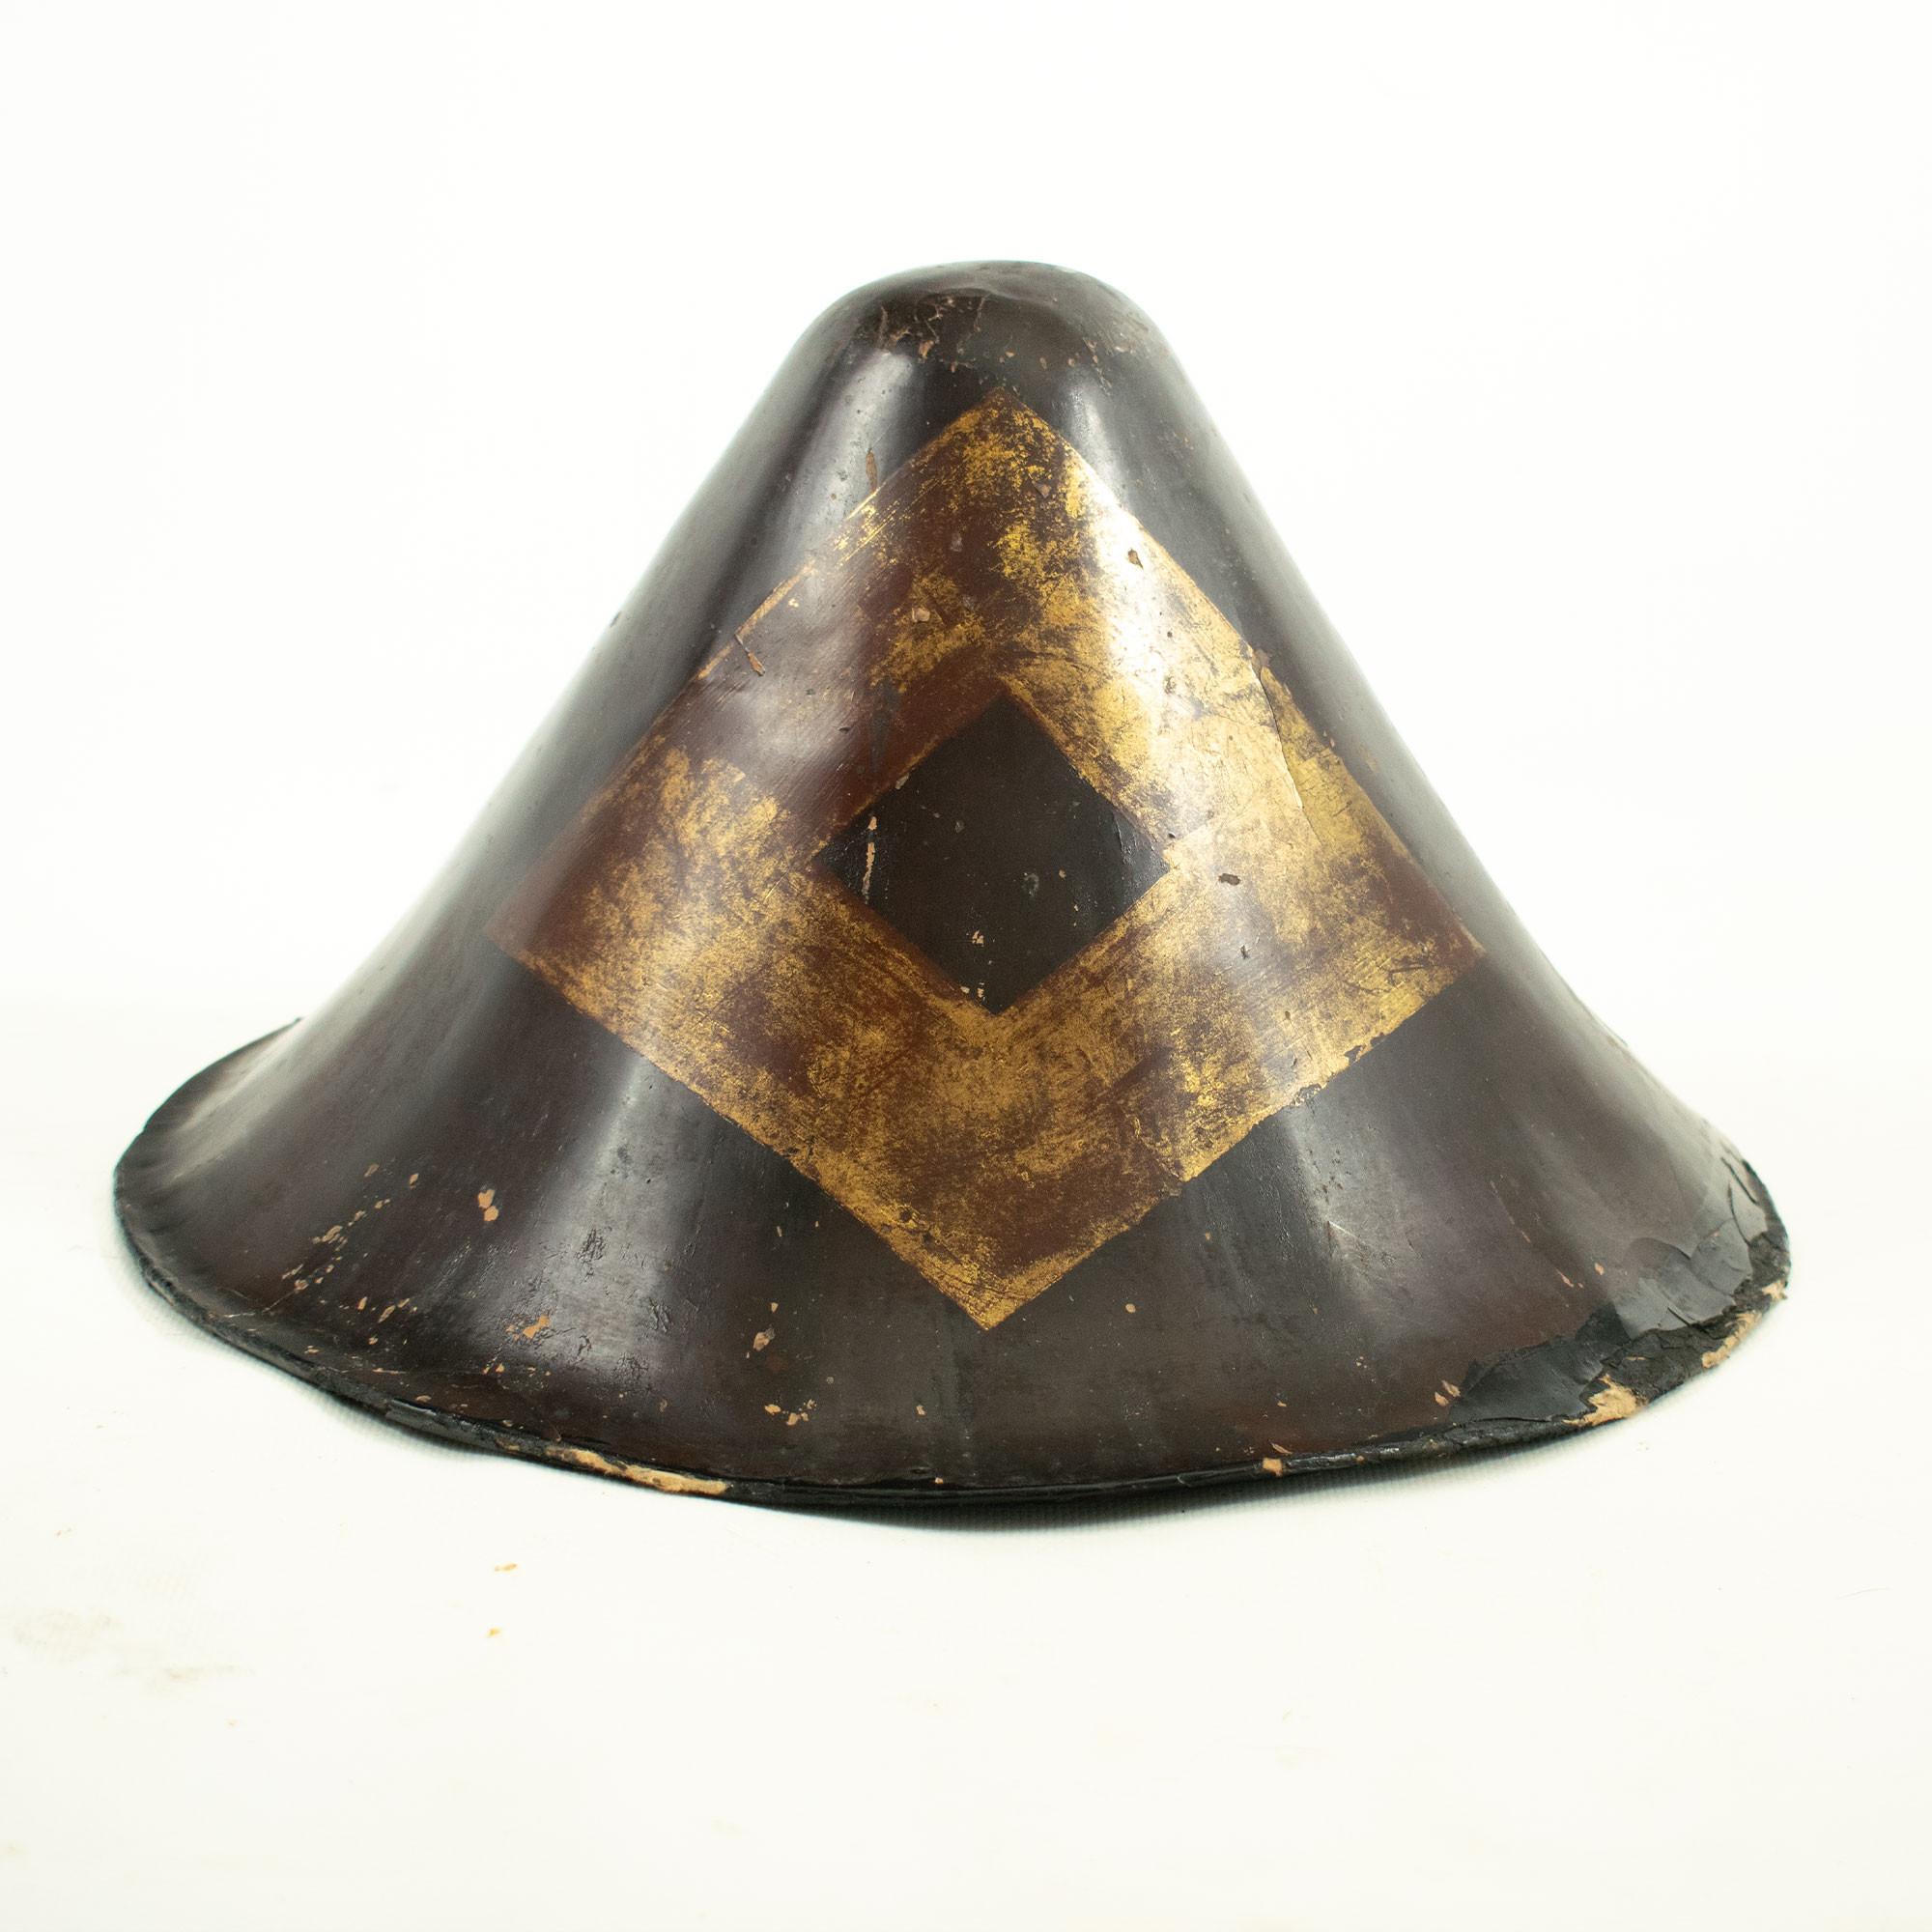 Authentic and origina Jingasa from the Edo period, conical Samurai headdress in harikake (paper mache technique) covered with black lacquer depicting a golden diamond-shaped kamon.

Without tehen (opening at the top of the helmet).  With black